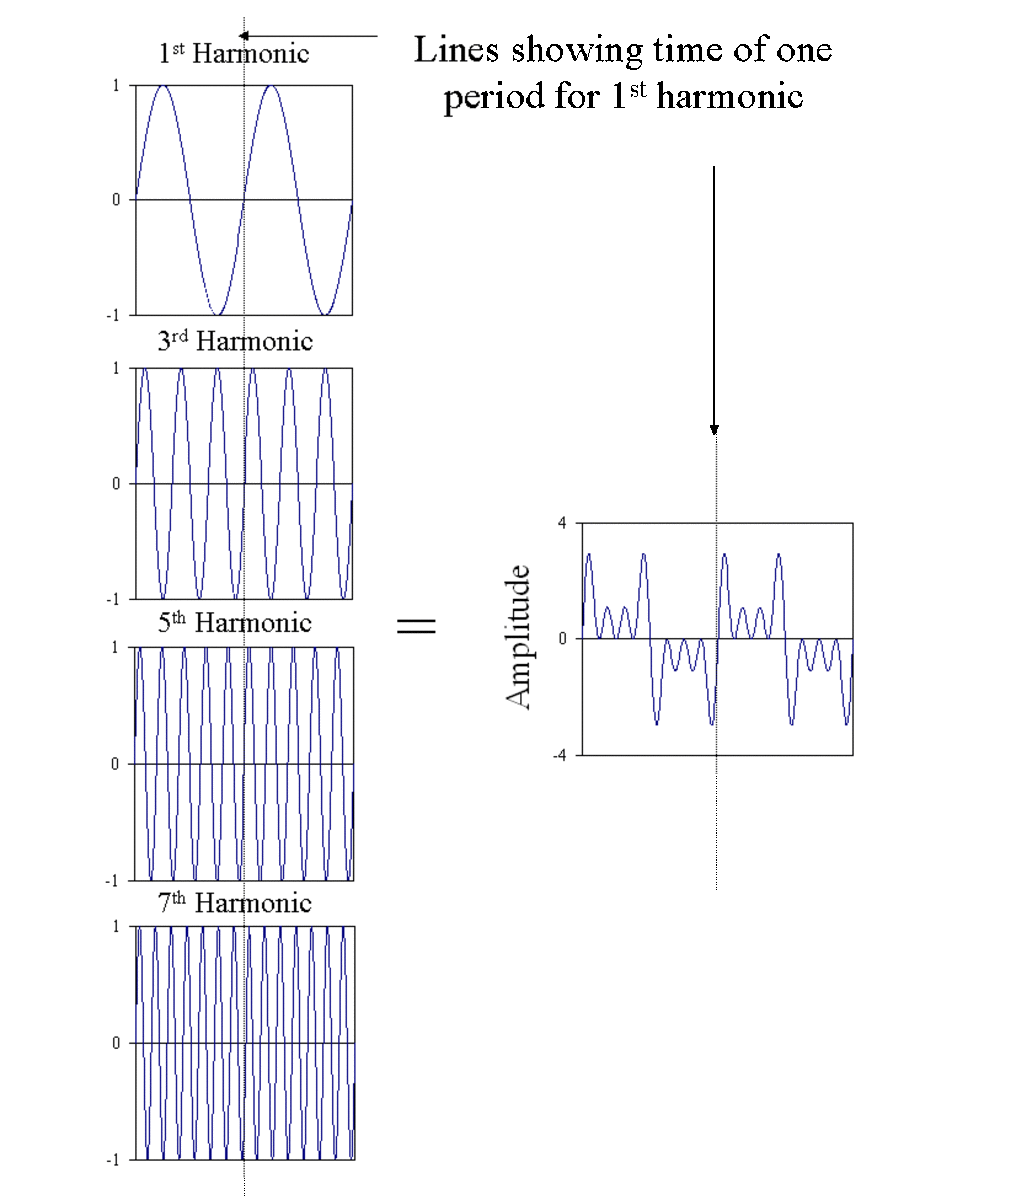 These graphs show the odd harmonics up to the seventh and the result of adding them together.